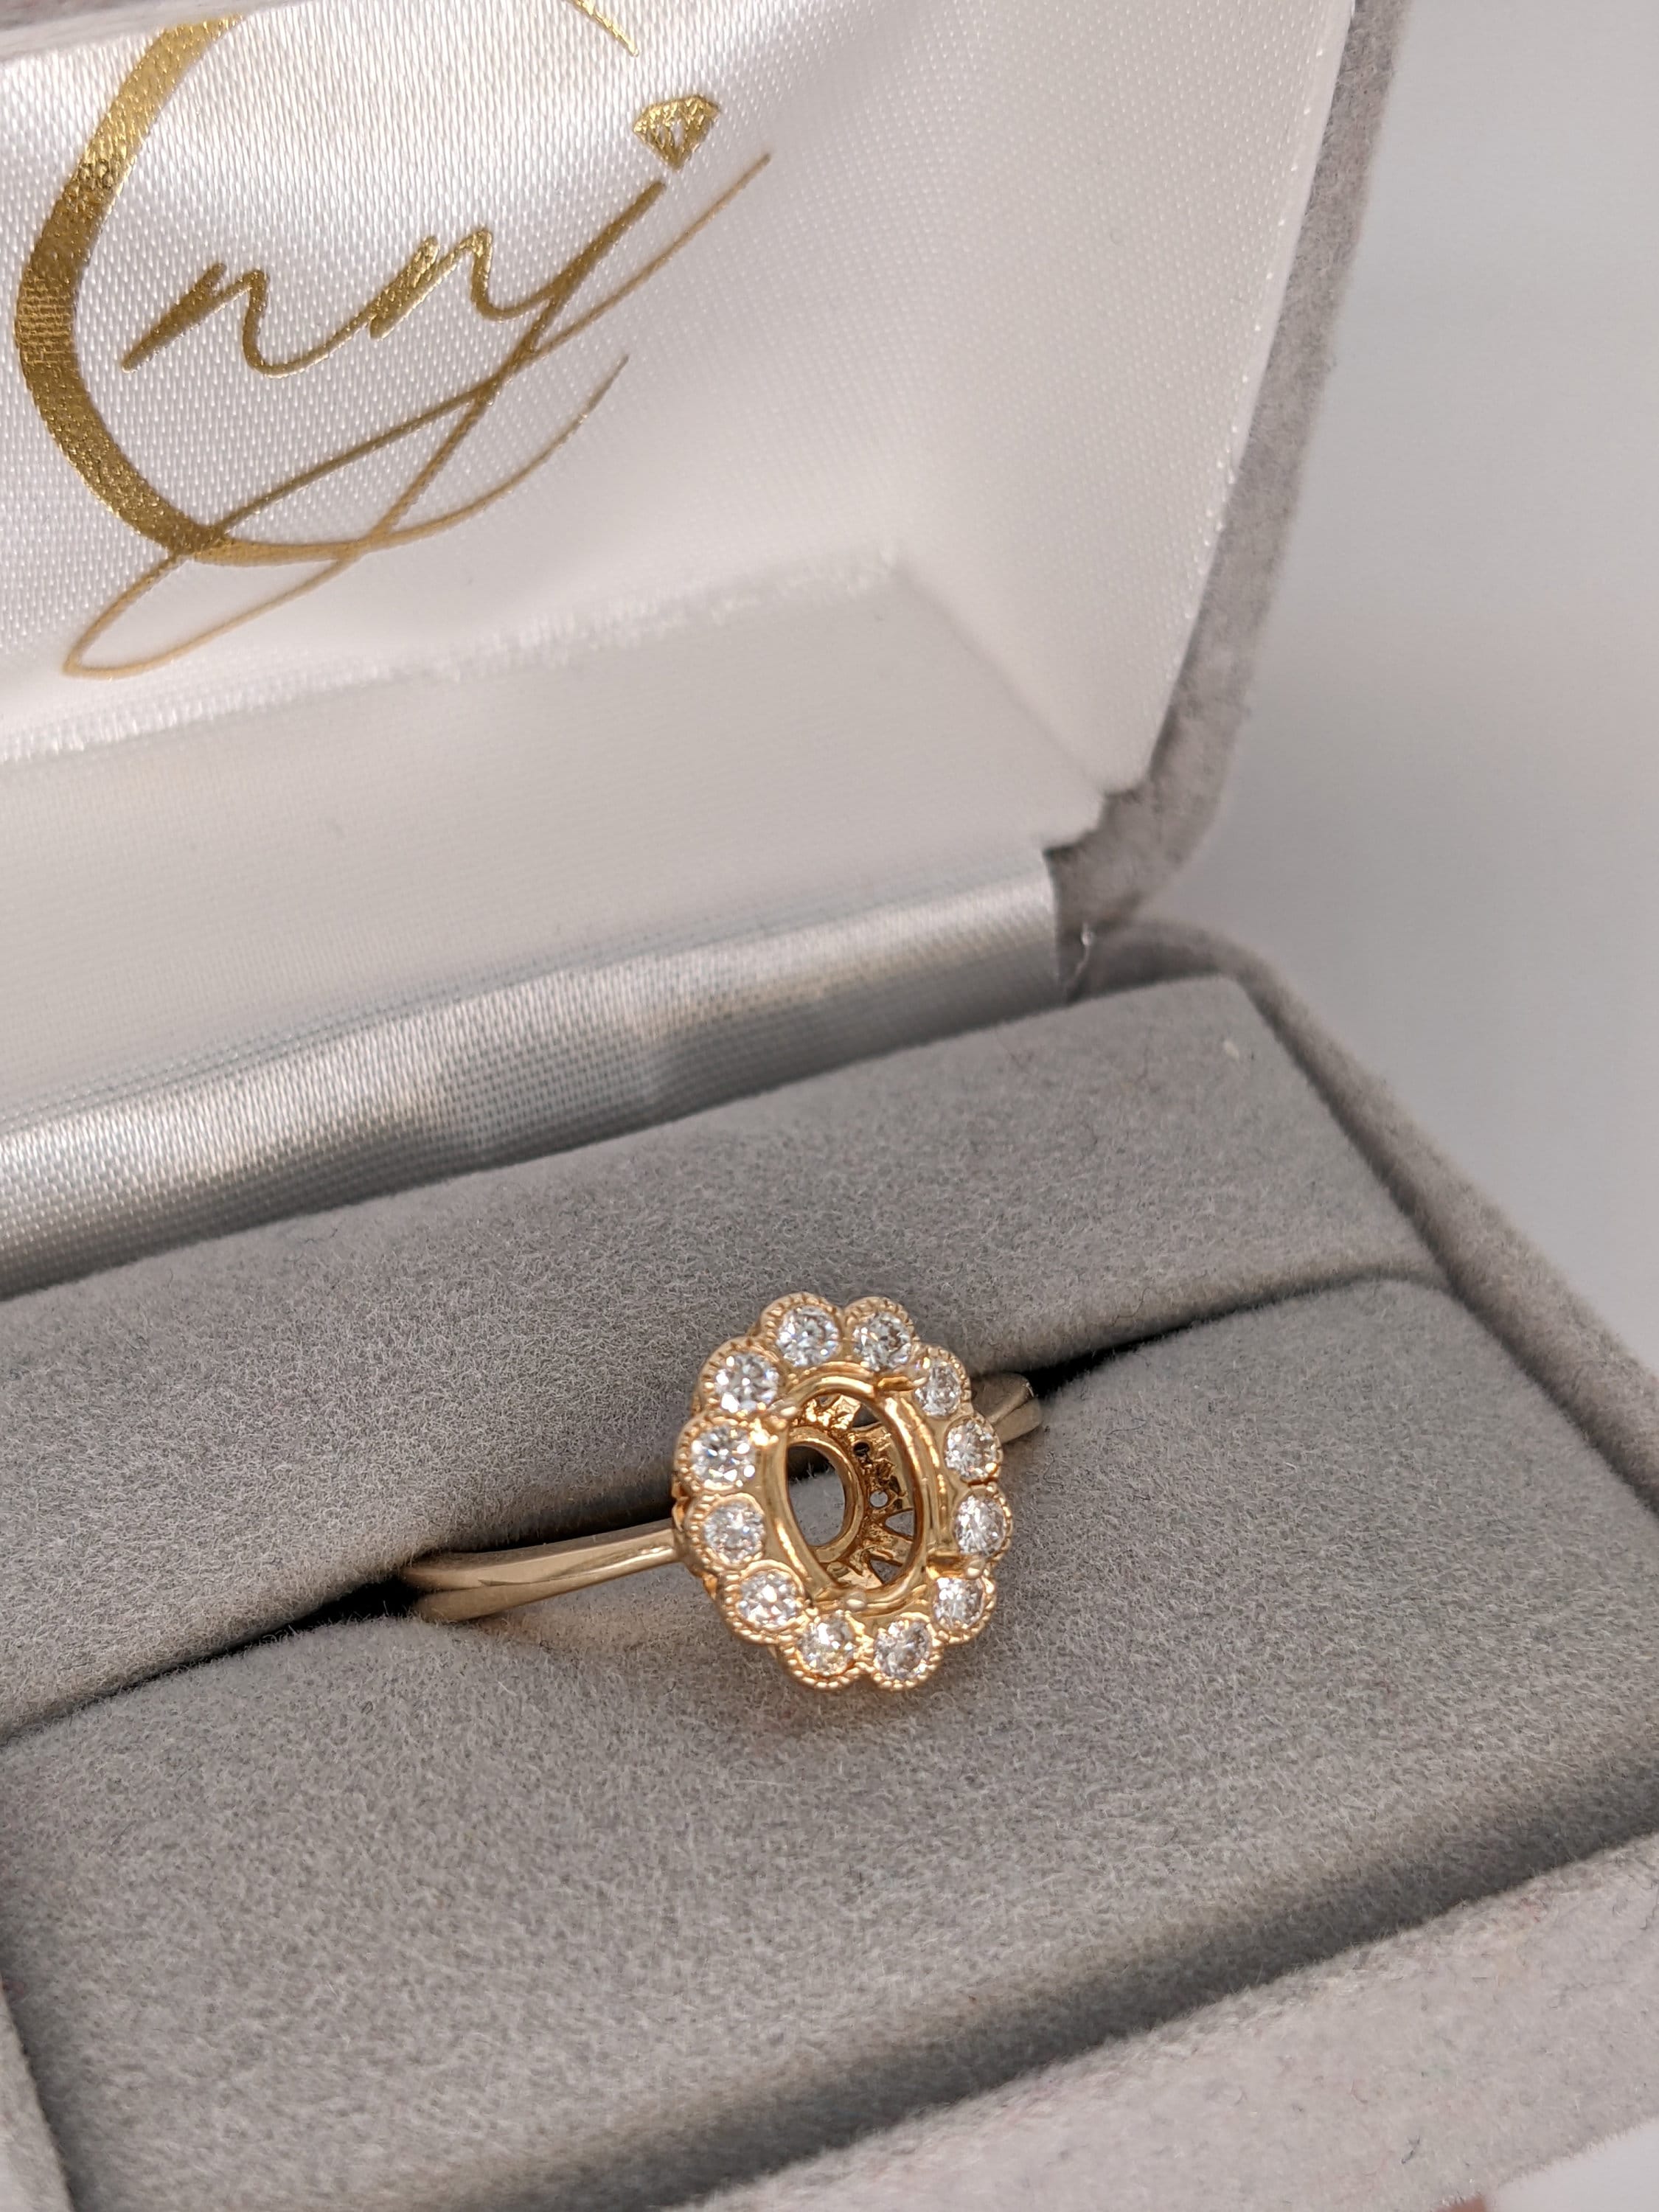 Oval Ring Semi Mount in Solid 14k White, Yellow or Rose Gold w Round Diamond Accents and Milgrain Details | Oval | Custom Sizes | Setting